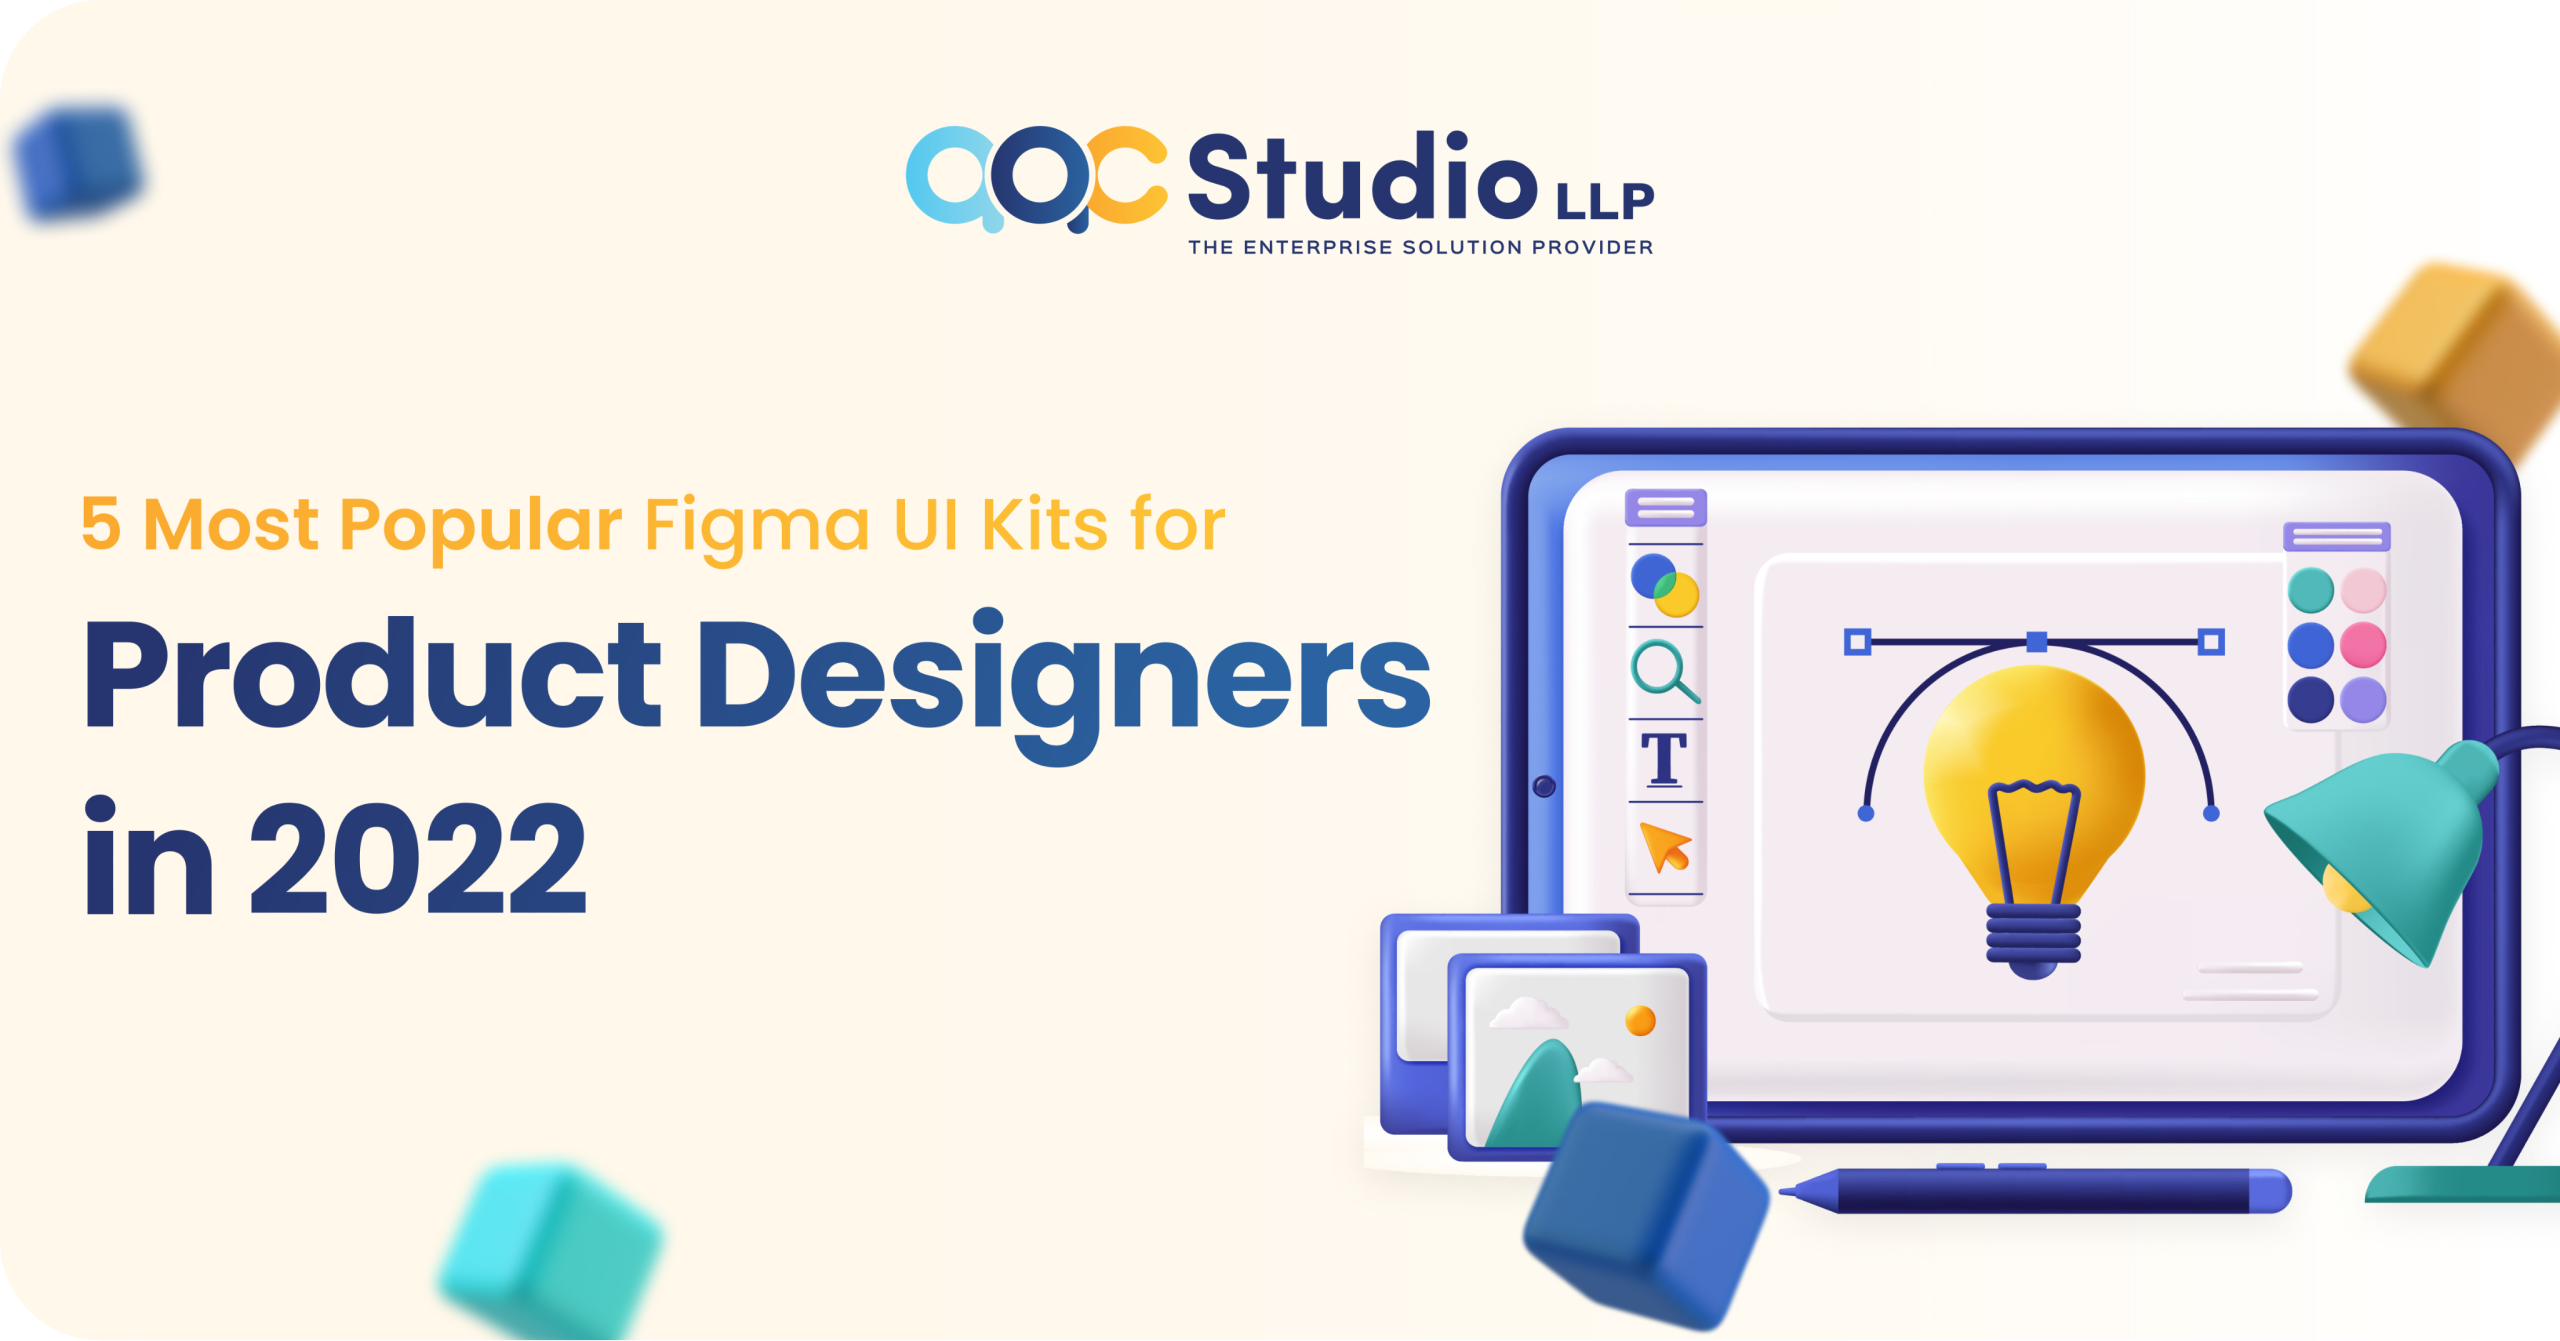 5 Most Popular Figma UI Kits for Product Designers in 2022